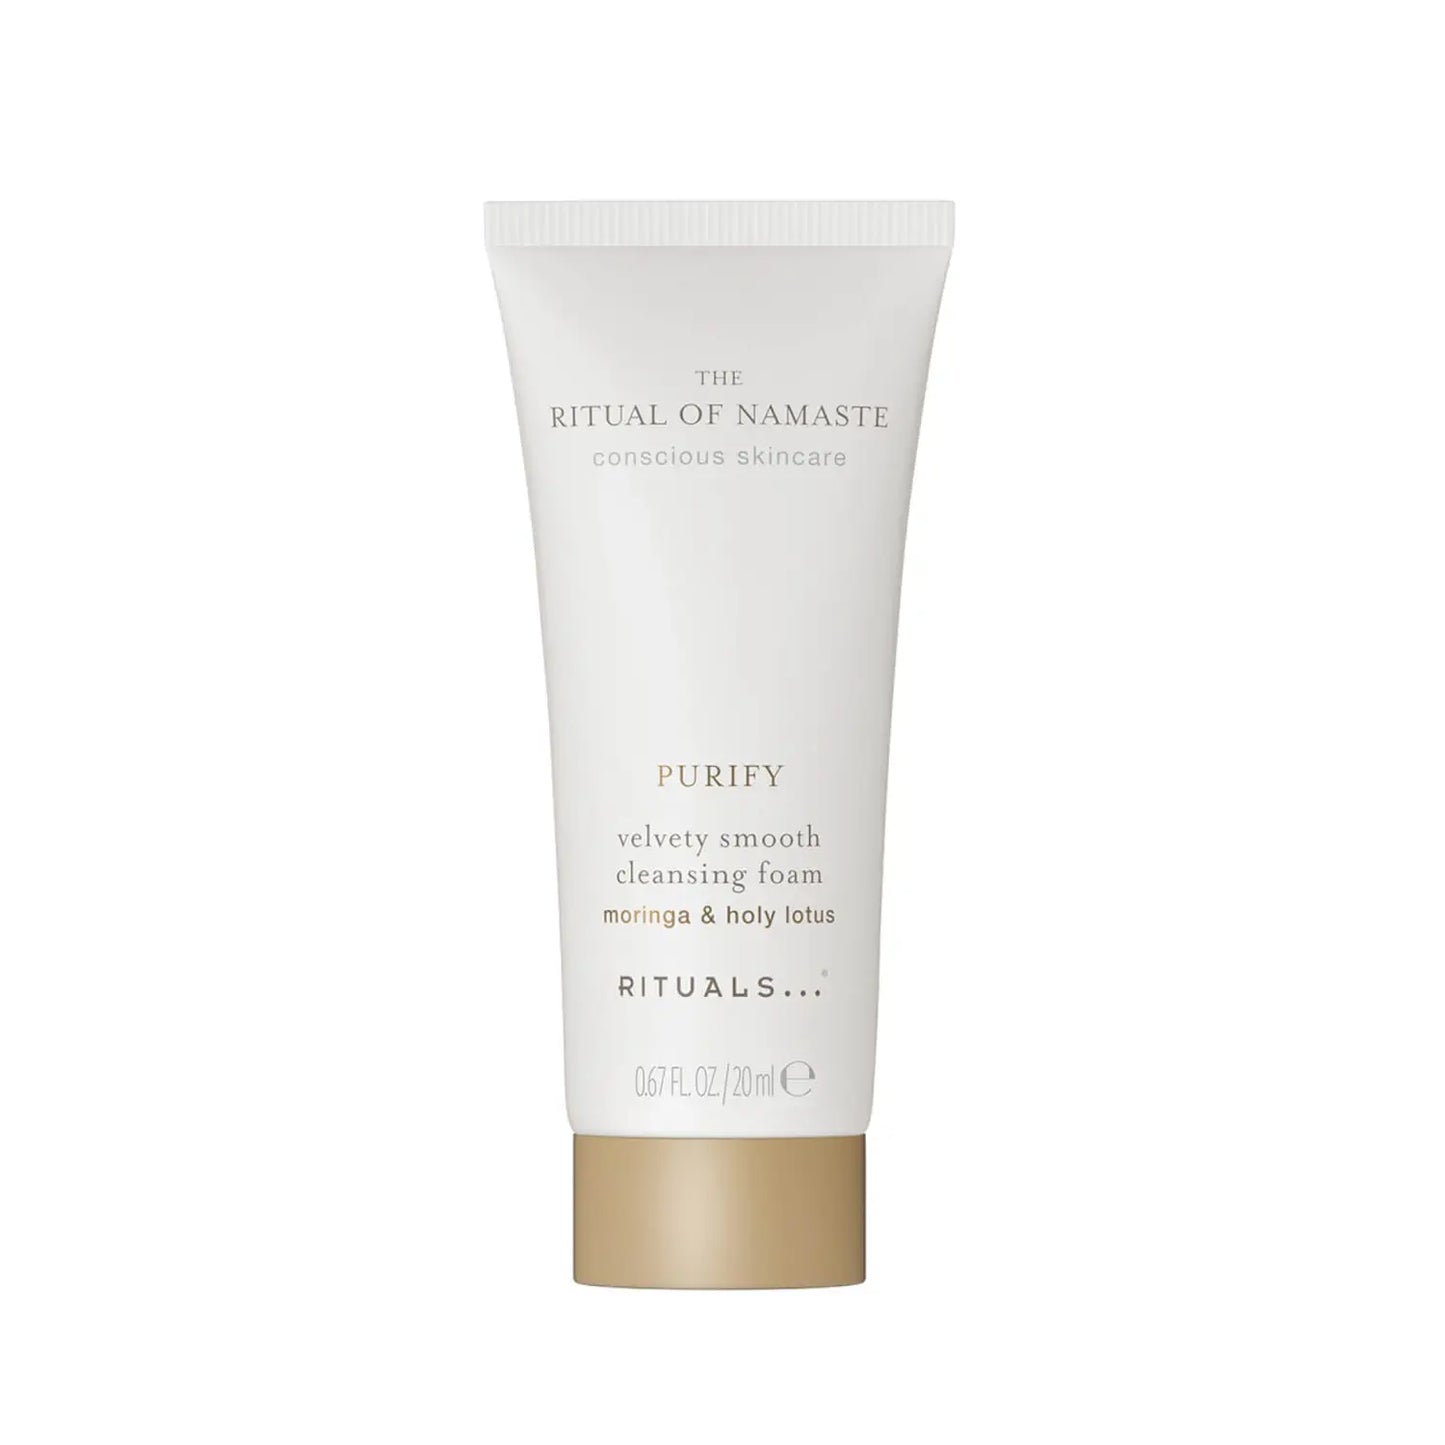 RITUALS The Ritual of Namaste Velvety Smooth Cleansing Foam 20ml